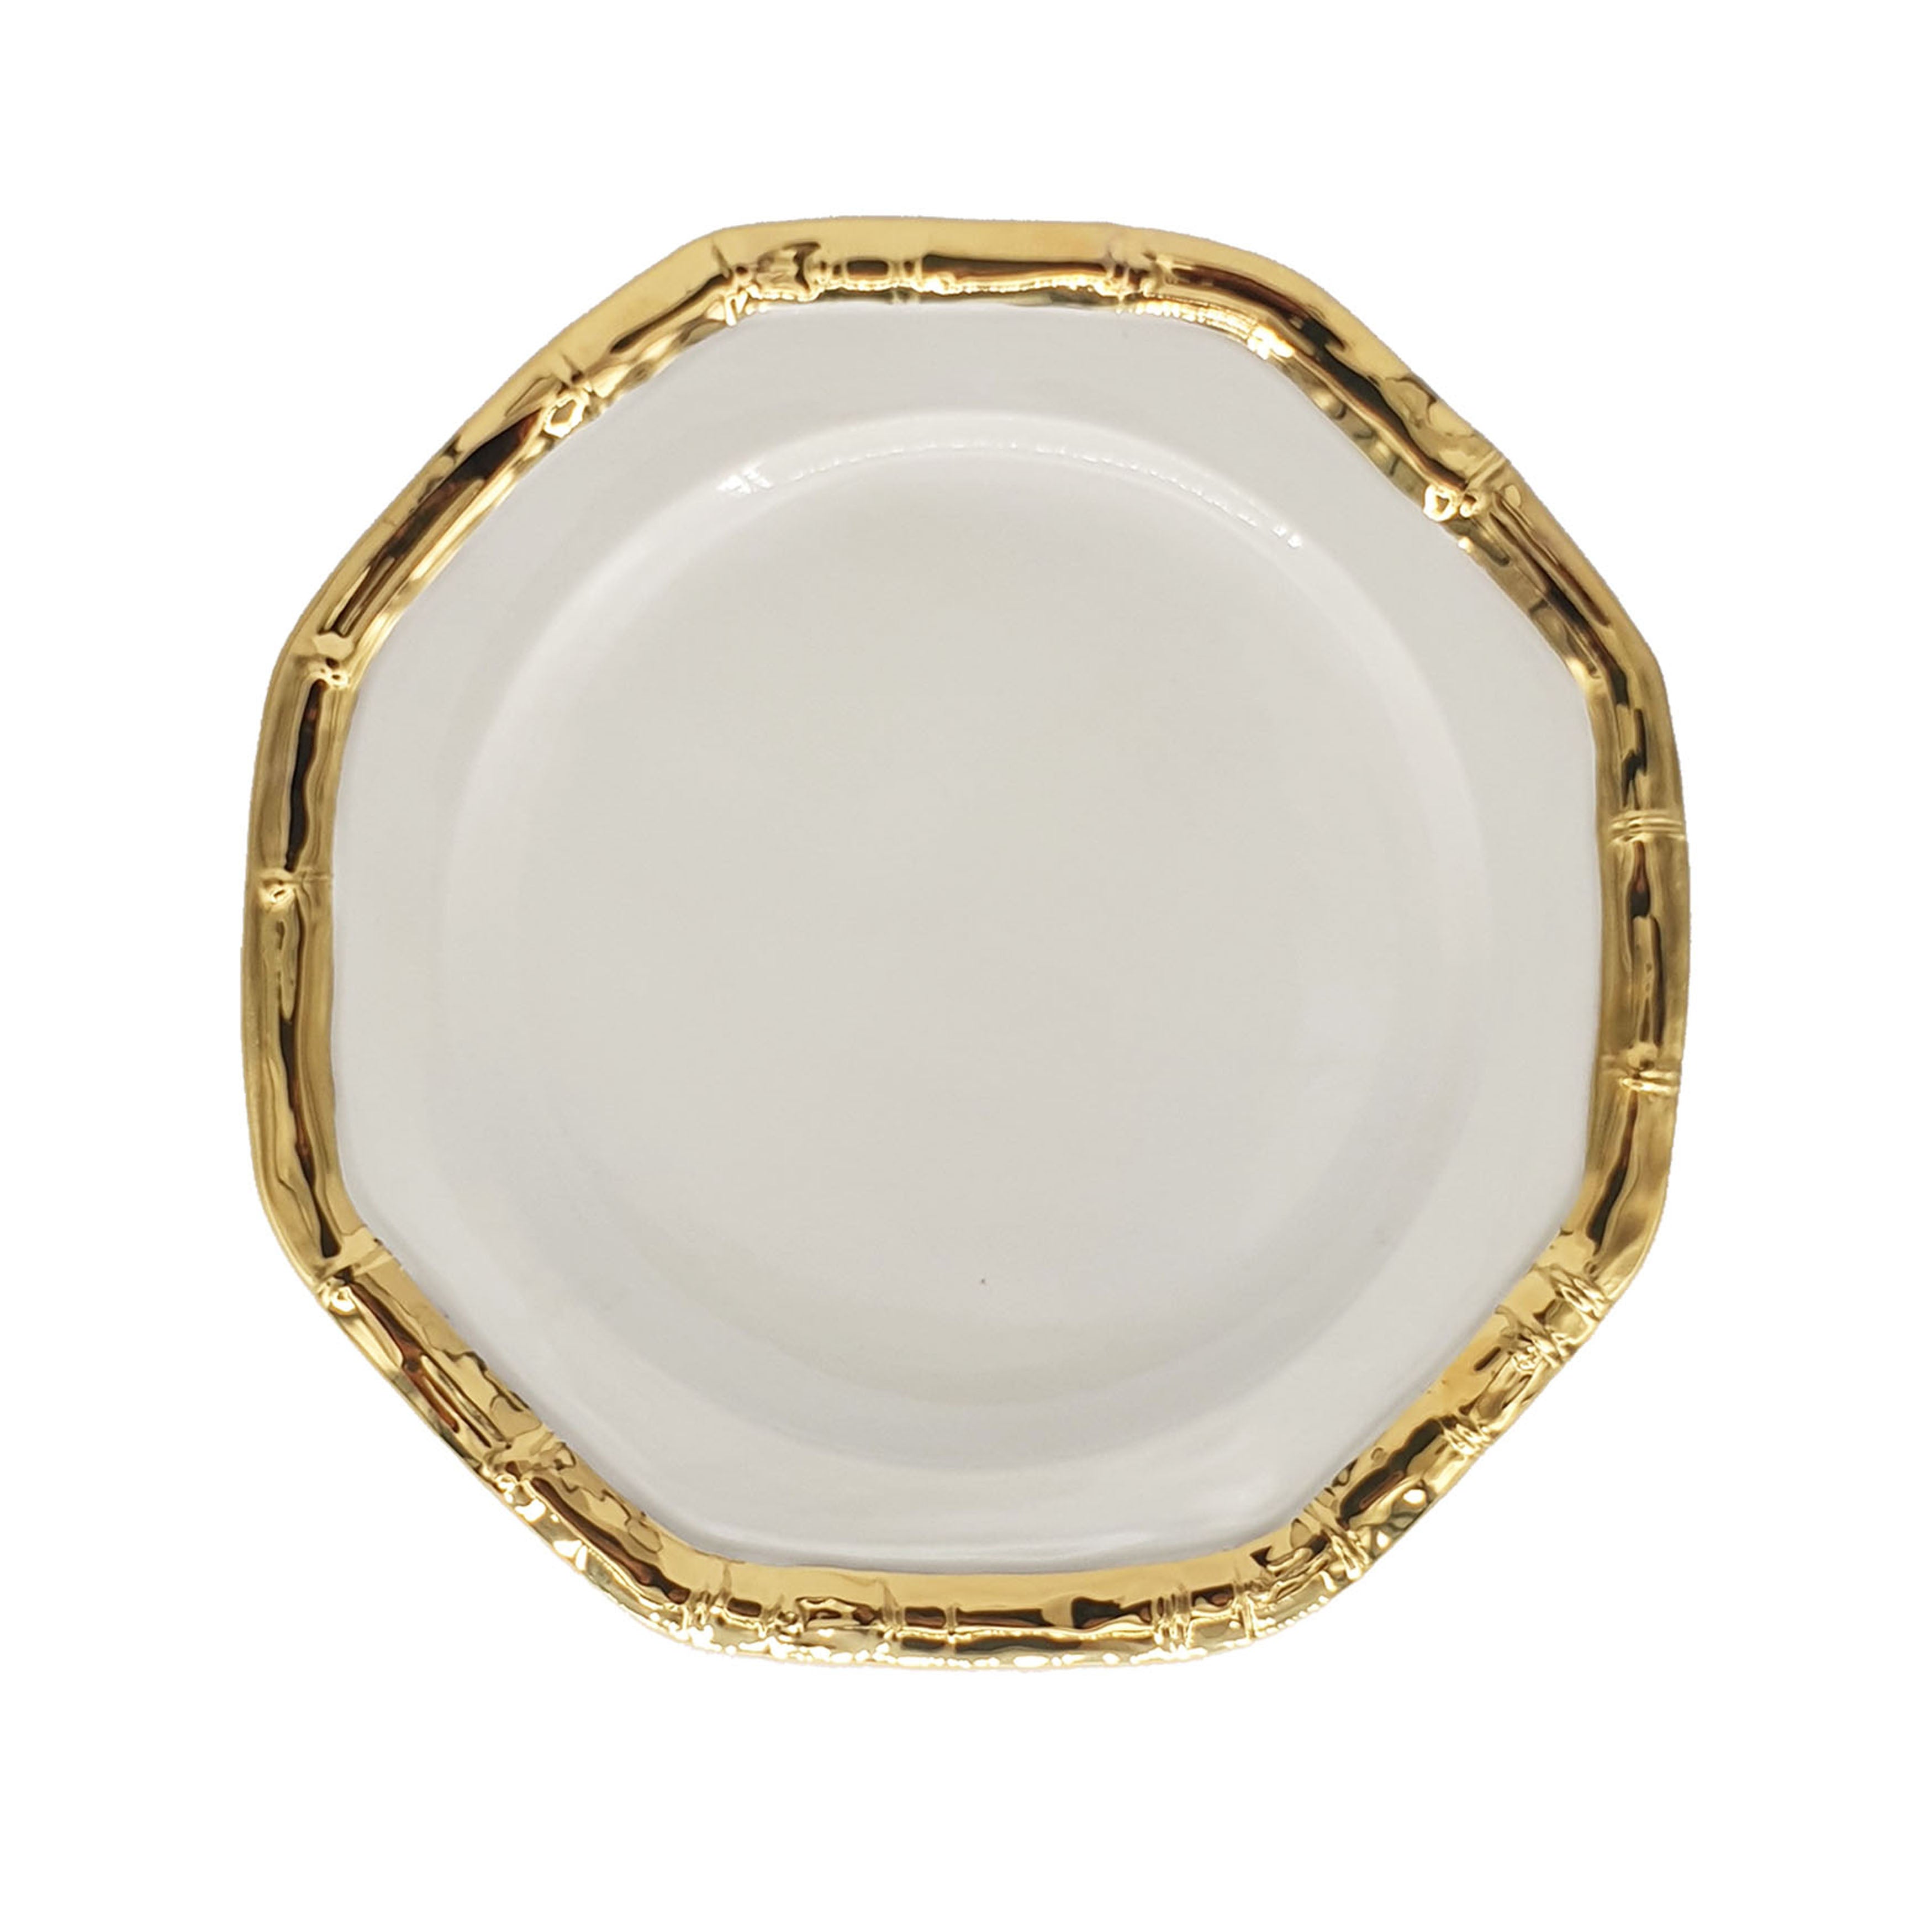 Bamboo Hand-Painted Ceramic Plate 21cm - Gold